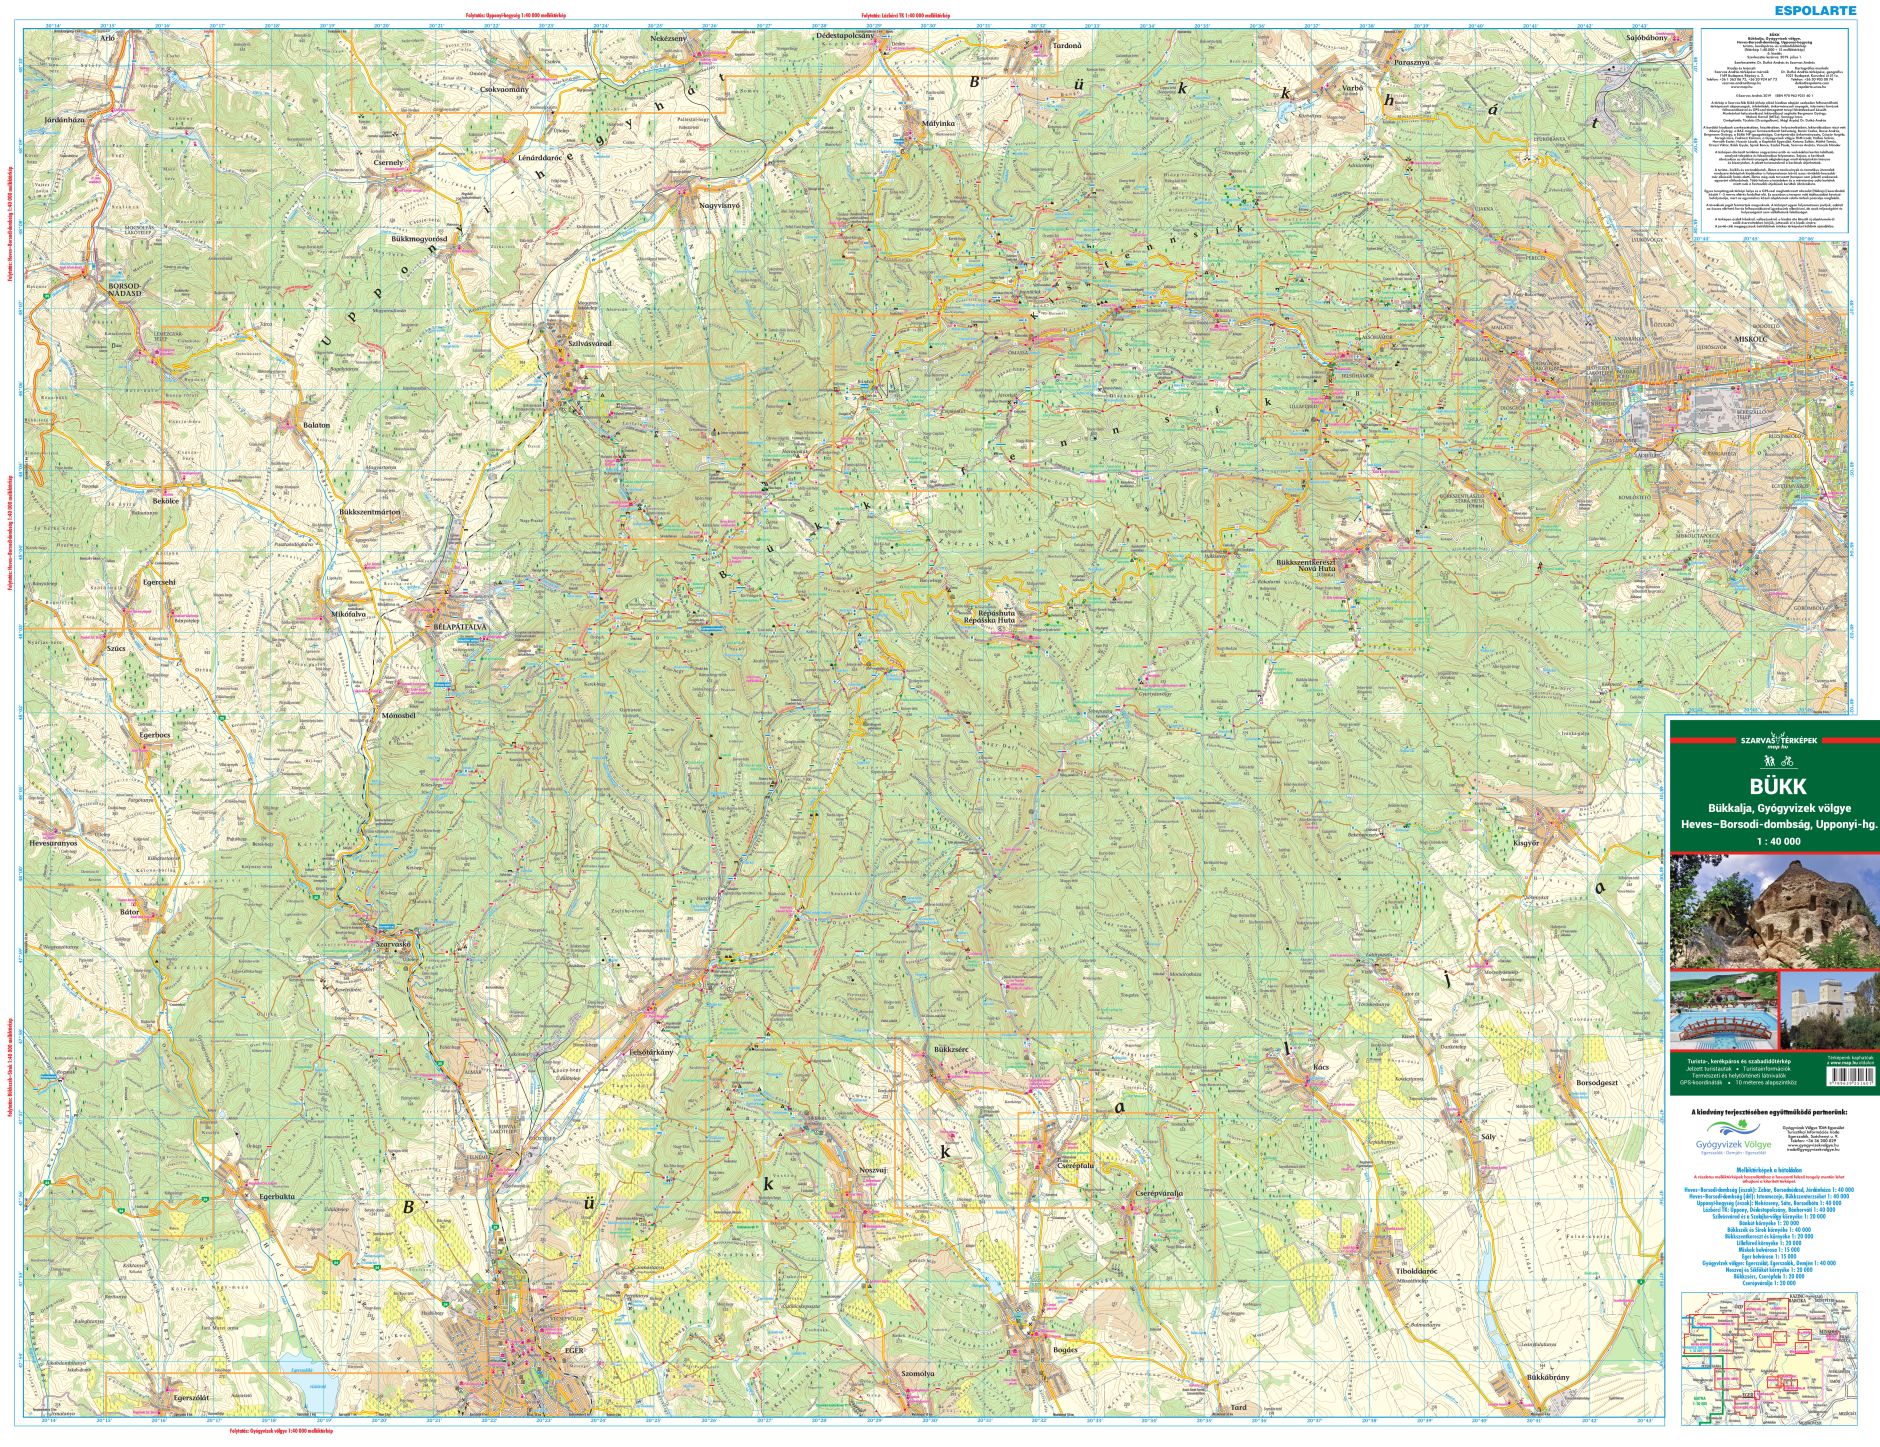 Area covered by the main map Bükk 1:40.000